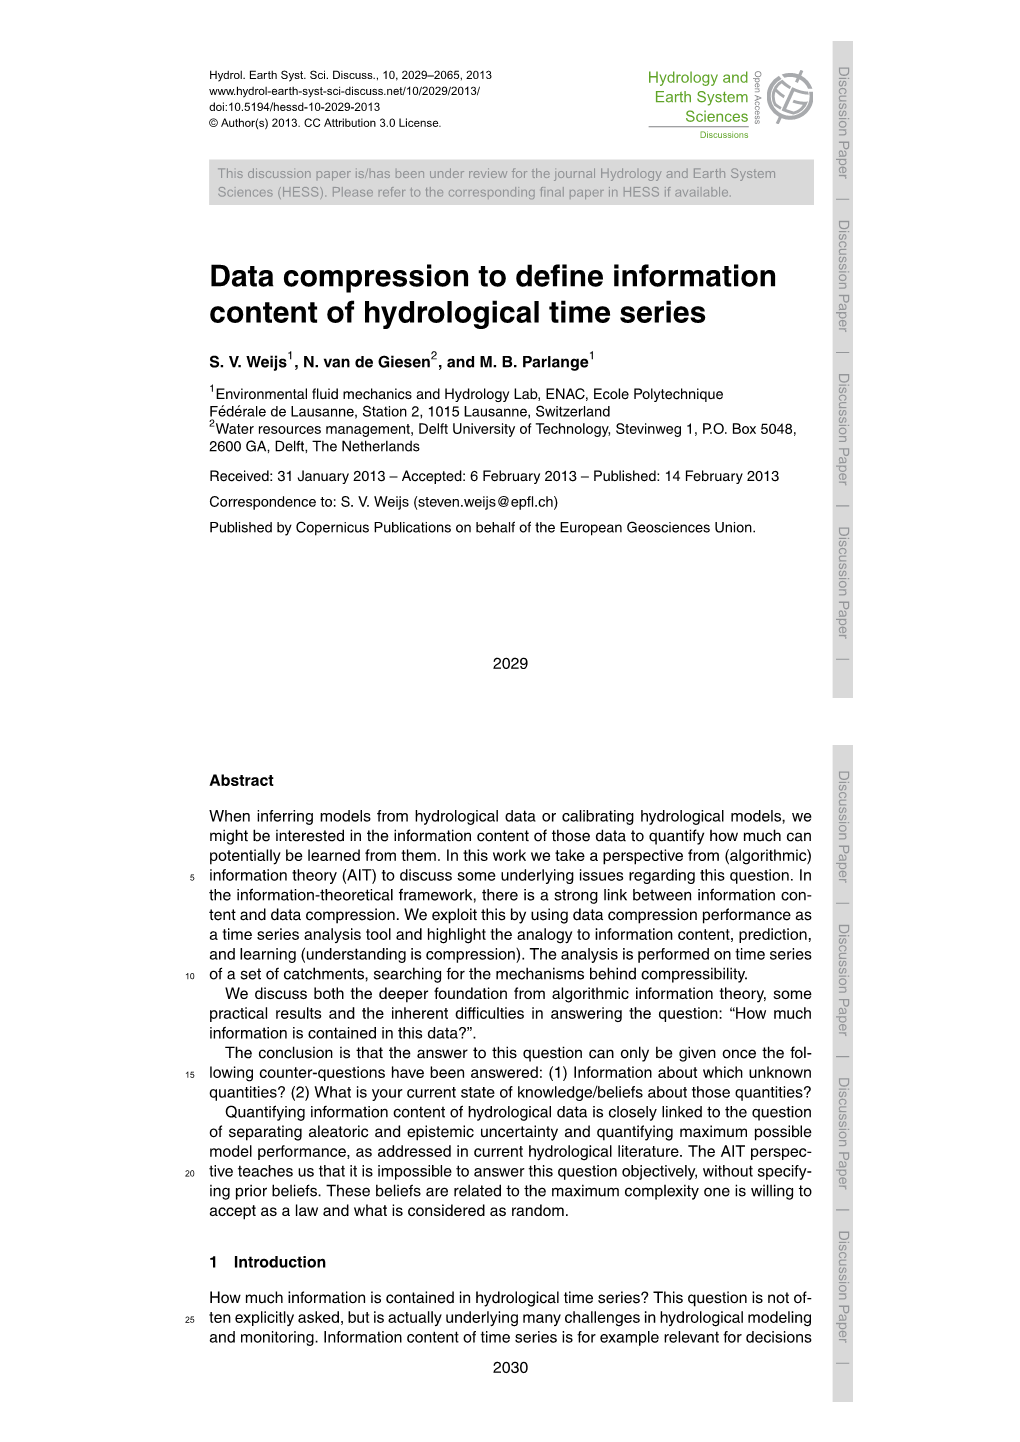 Data Compression to Define Information Content of Hydrological